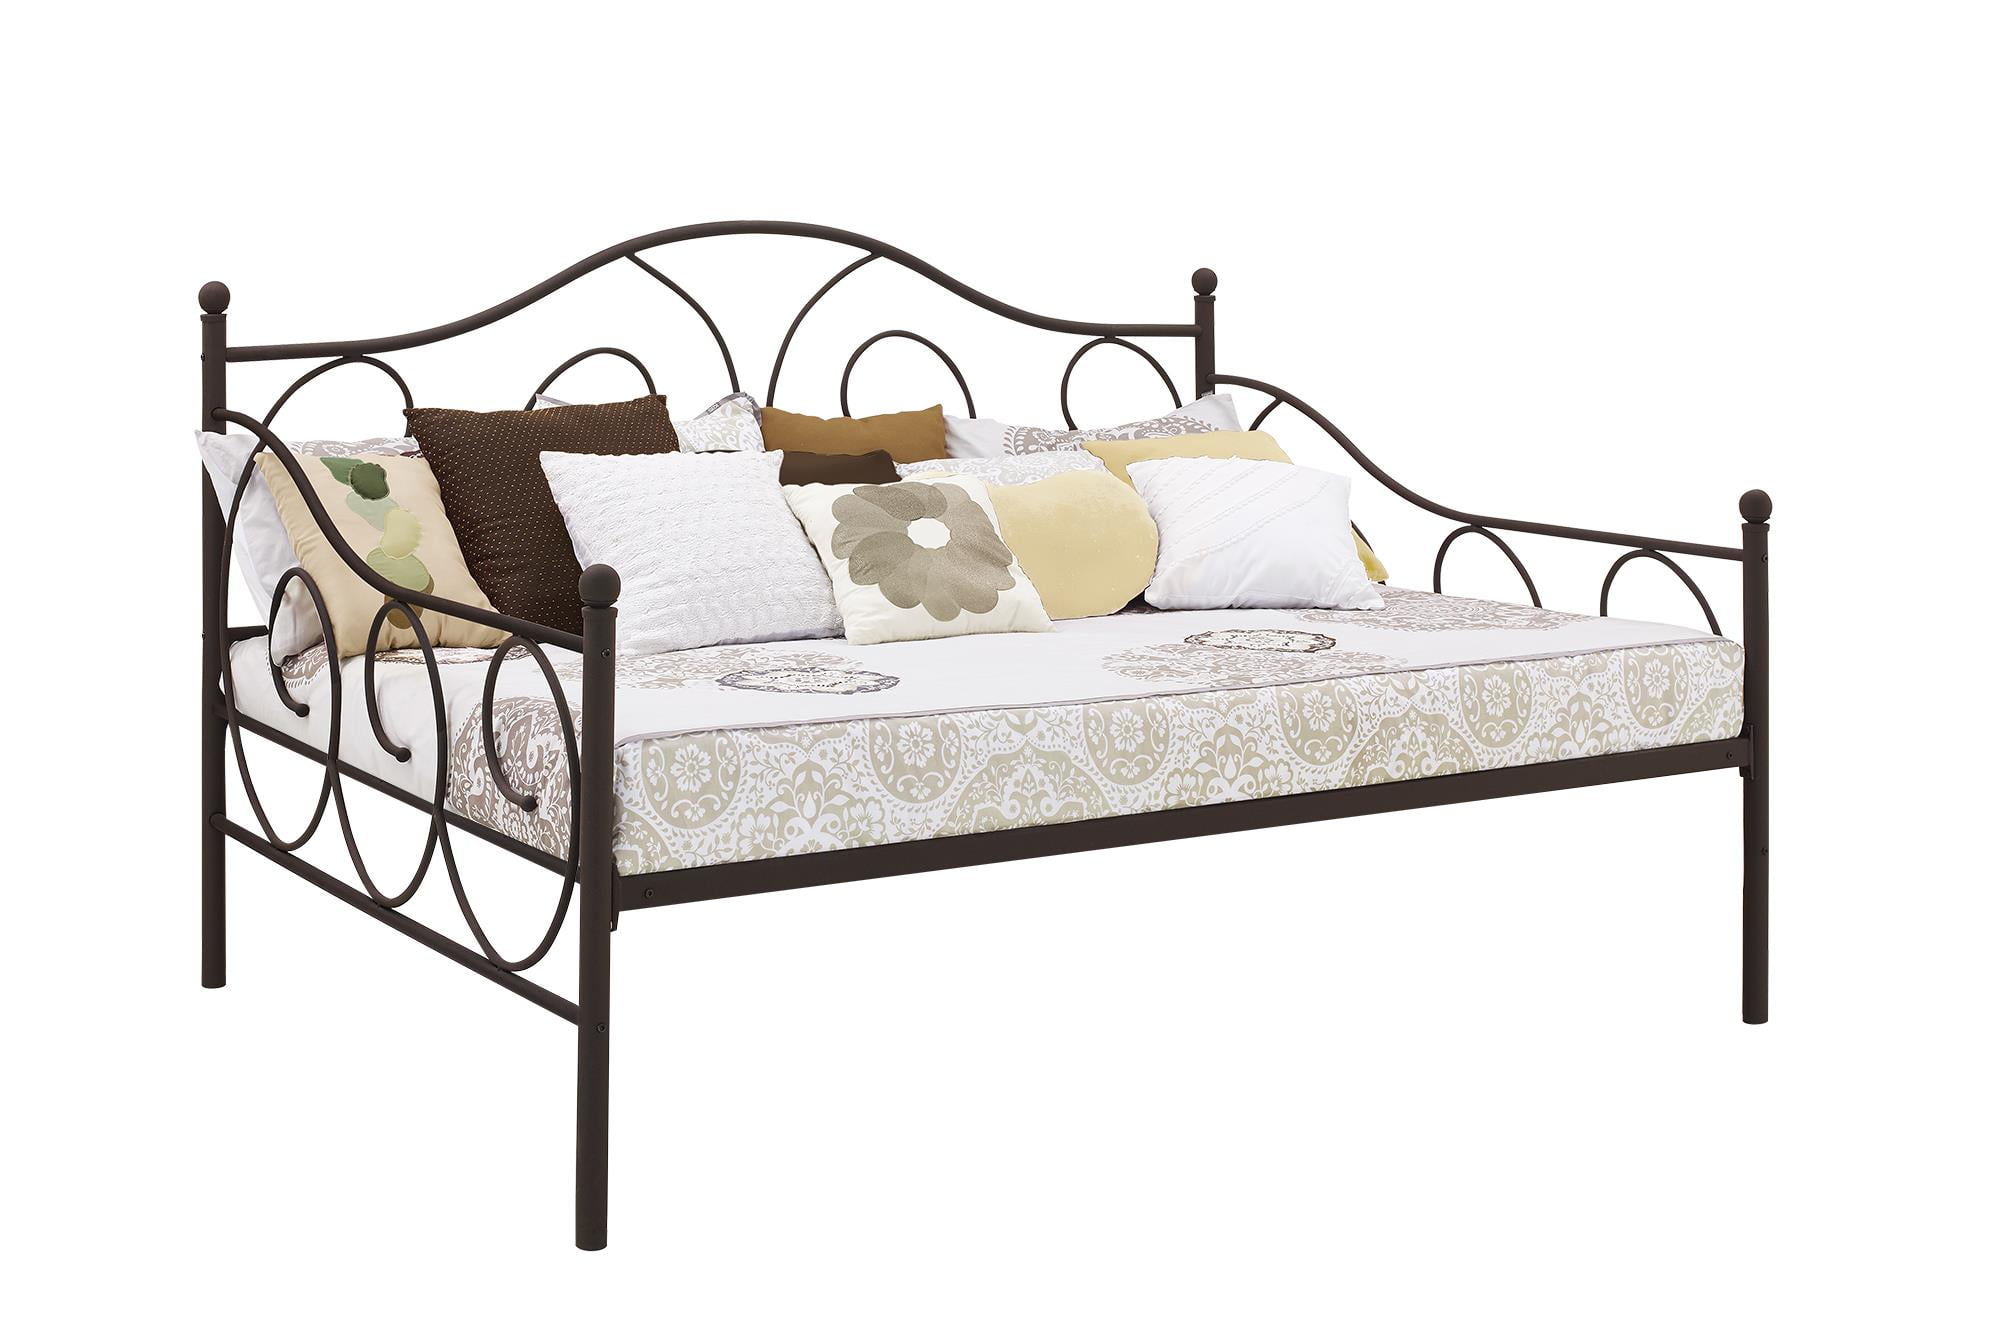 Dhp Victoria Full Size Metal Daybed With Mattress Multiple Colors Walmart Com Walmart Com